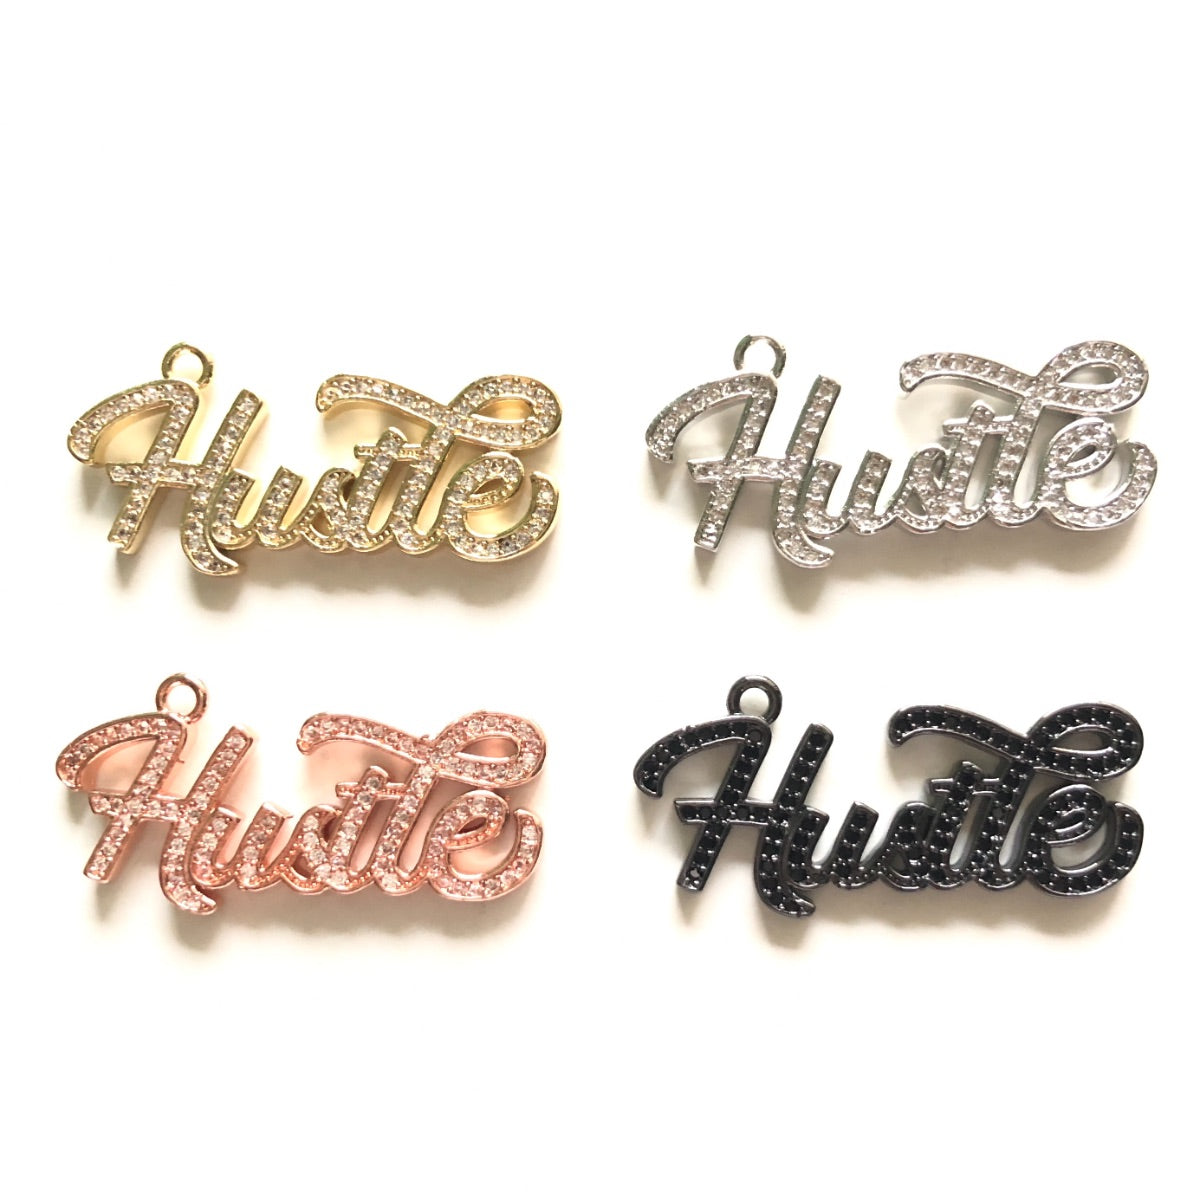 10pcs/lot 37.5*18mm CZ Paved Hustle Charms CZ Paved Charms On Sale Words & Quotes Charms Beads Beyond